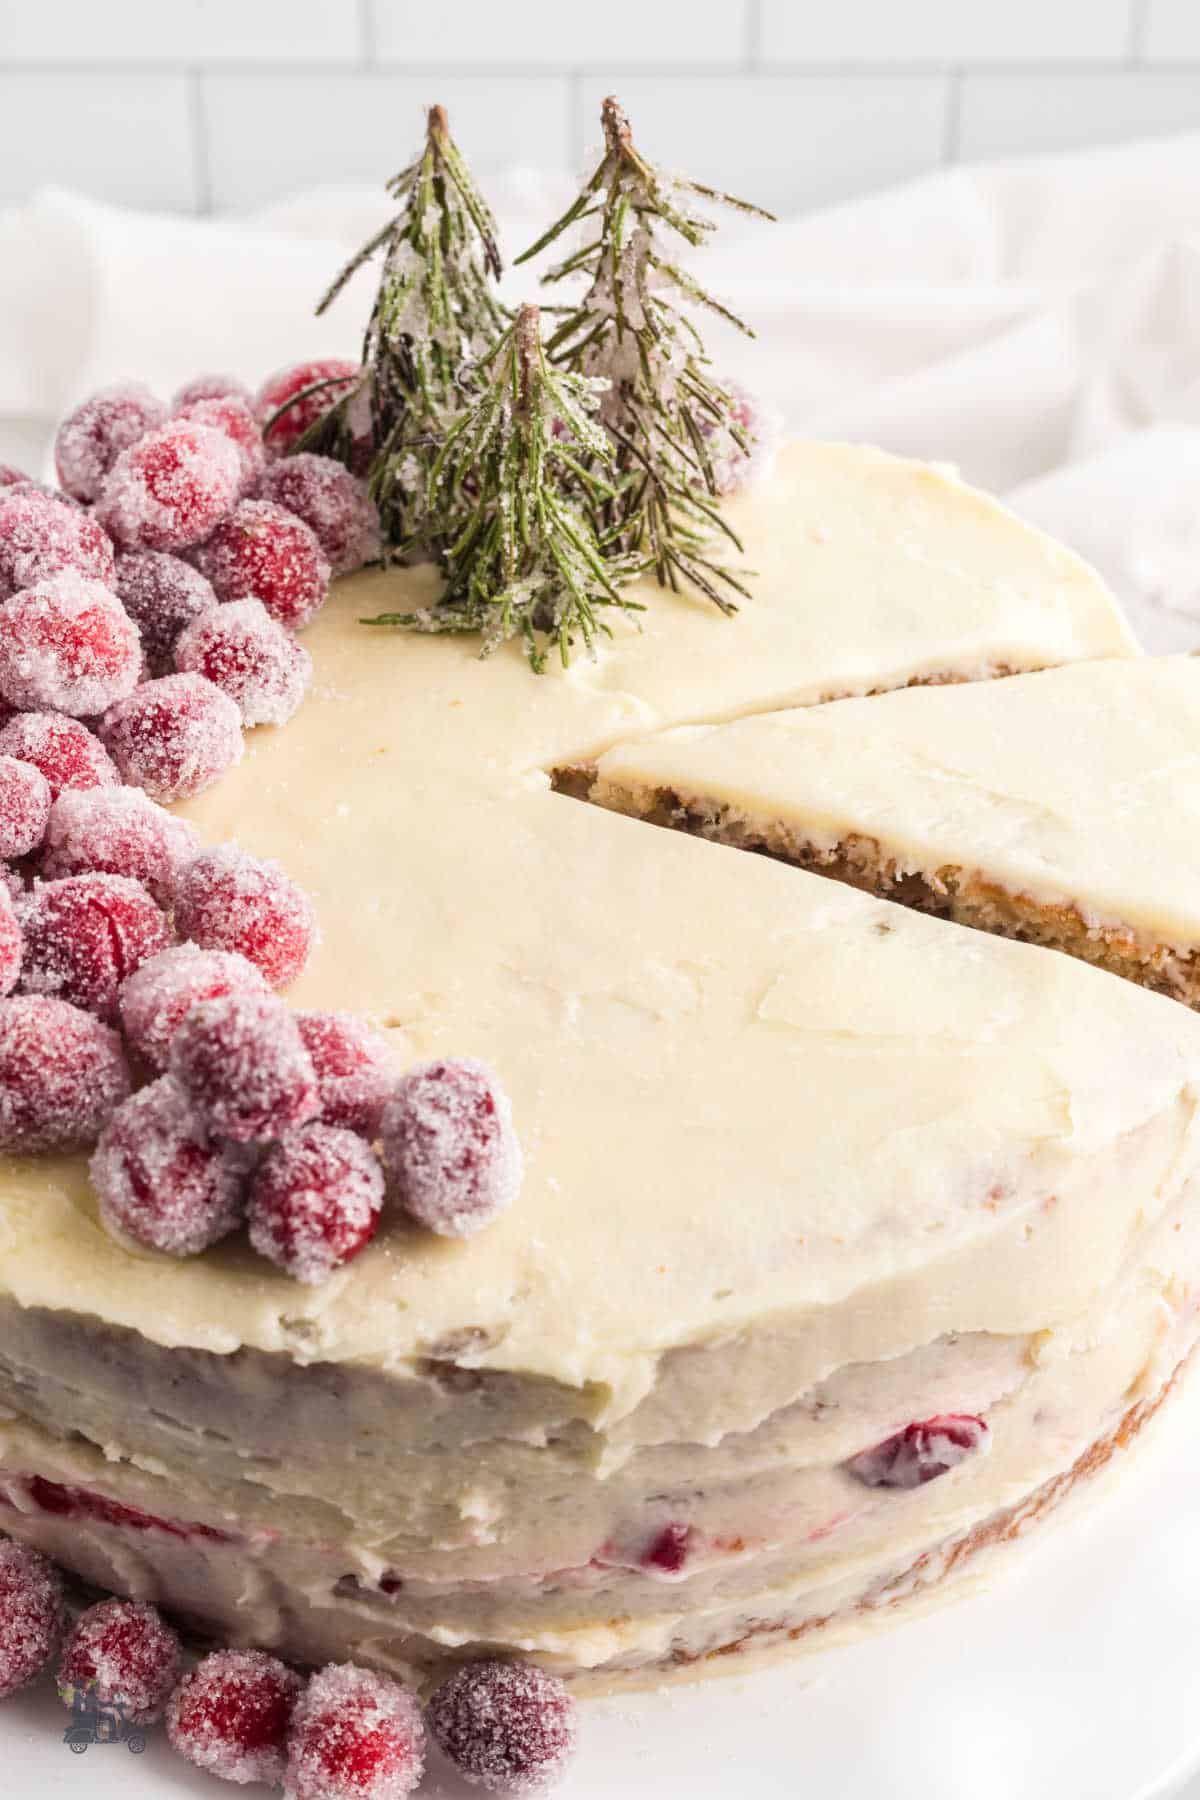 Cranberry Cake with white frosting and garnished with sugared cranberries and pine trees made of fresh rosemary sprigs. 